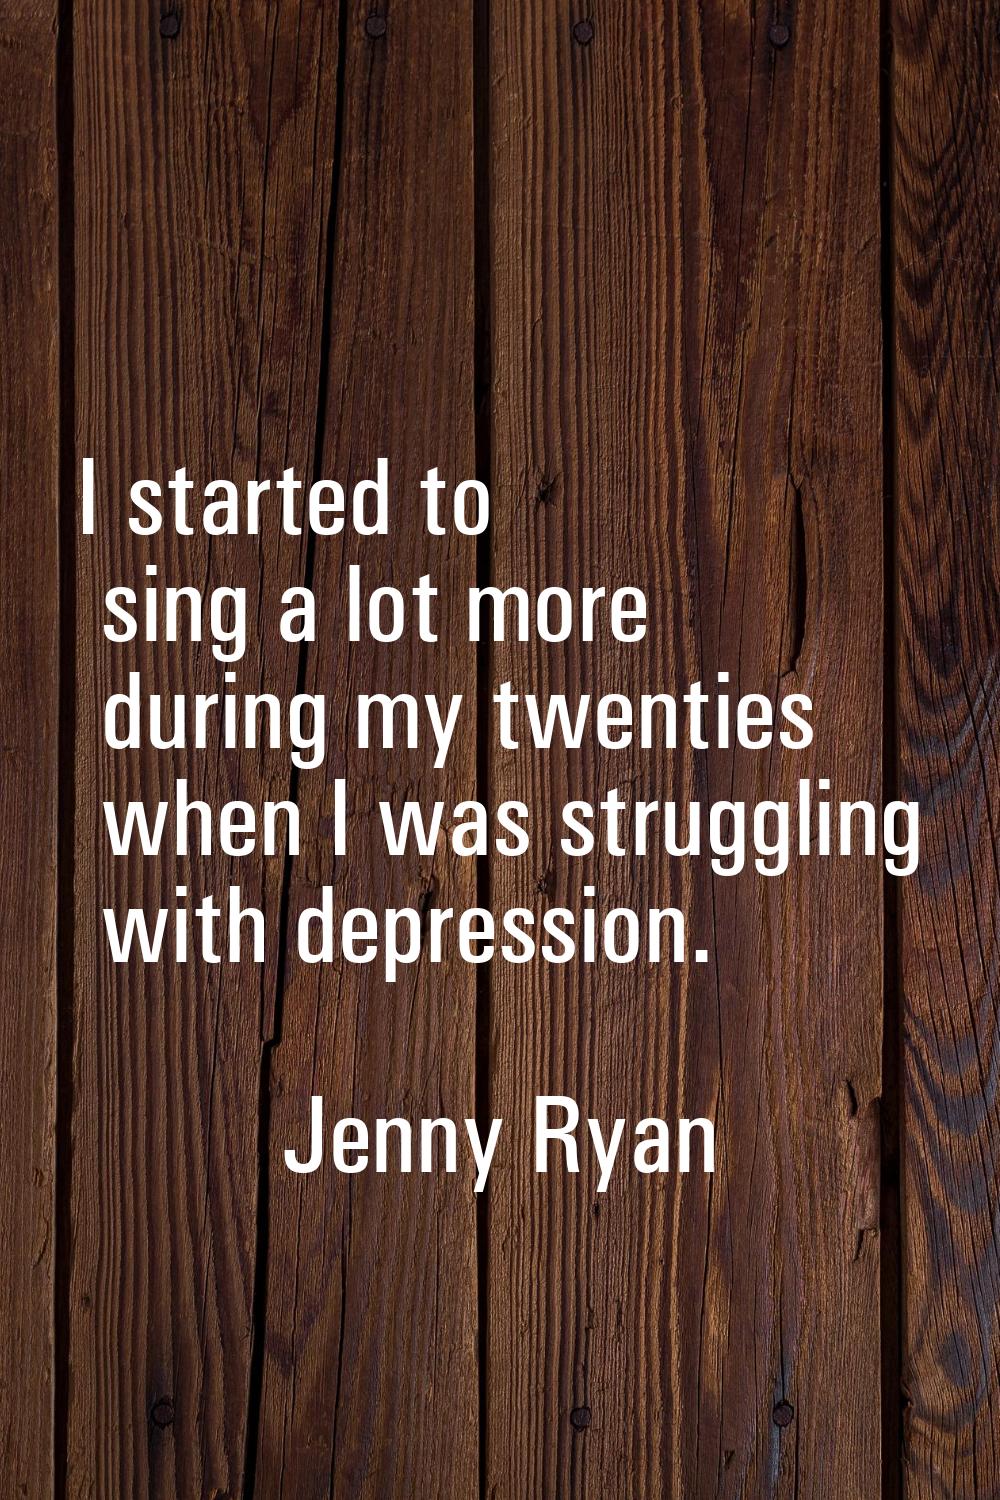 I started to sing a lot more during my twenties when I was struggling with depression.